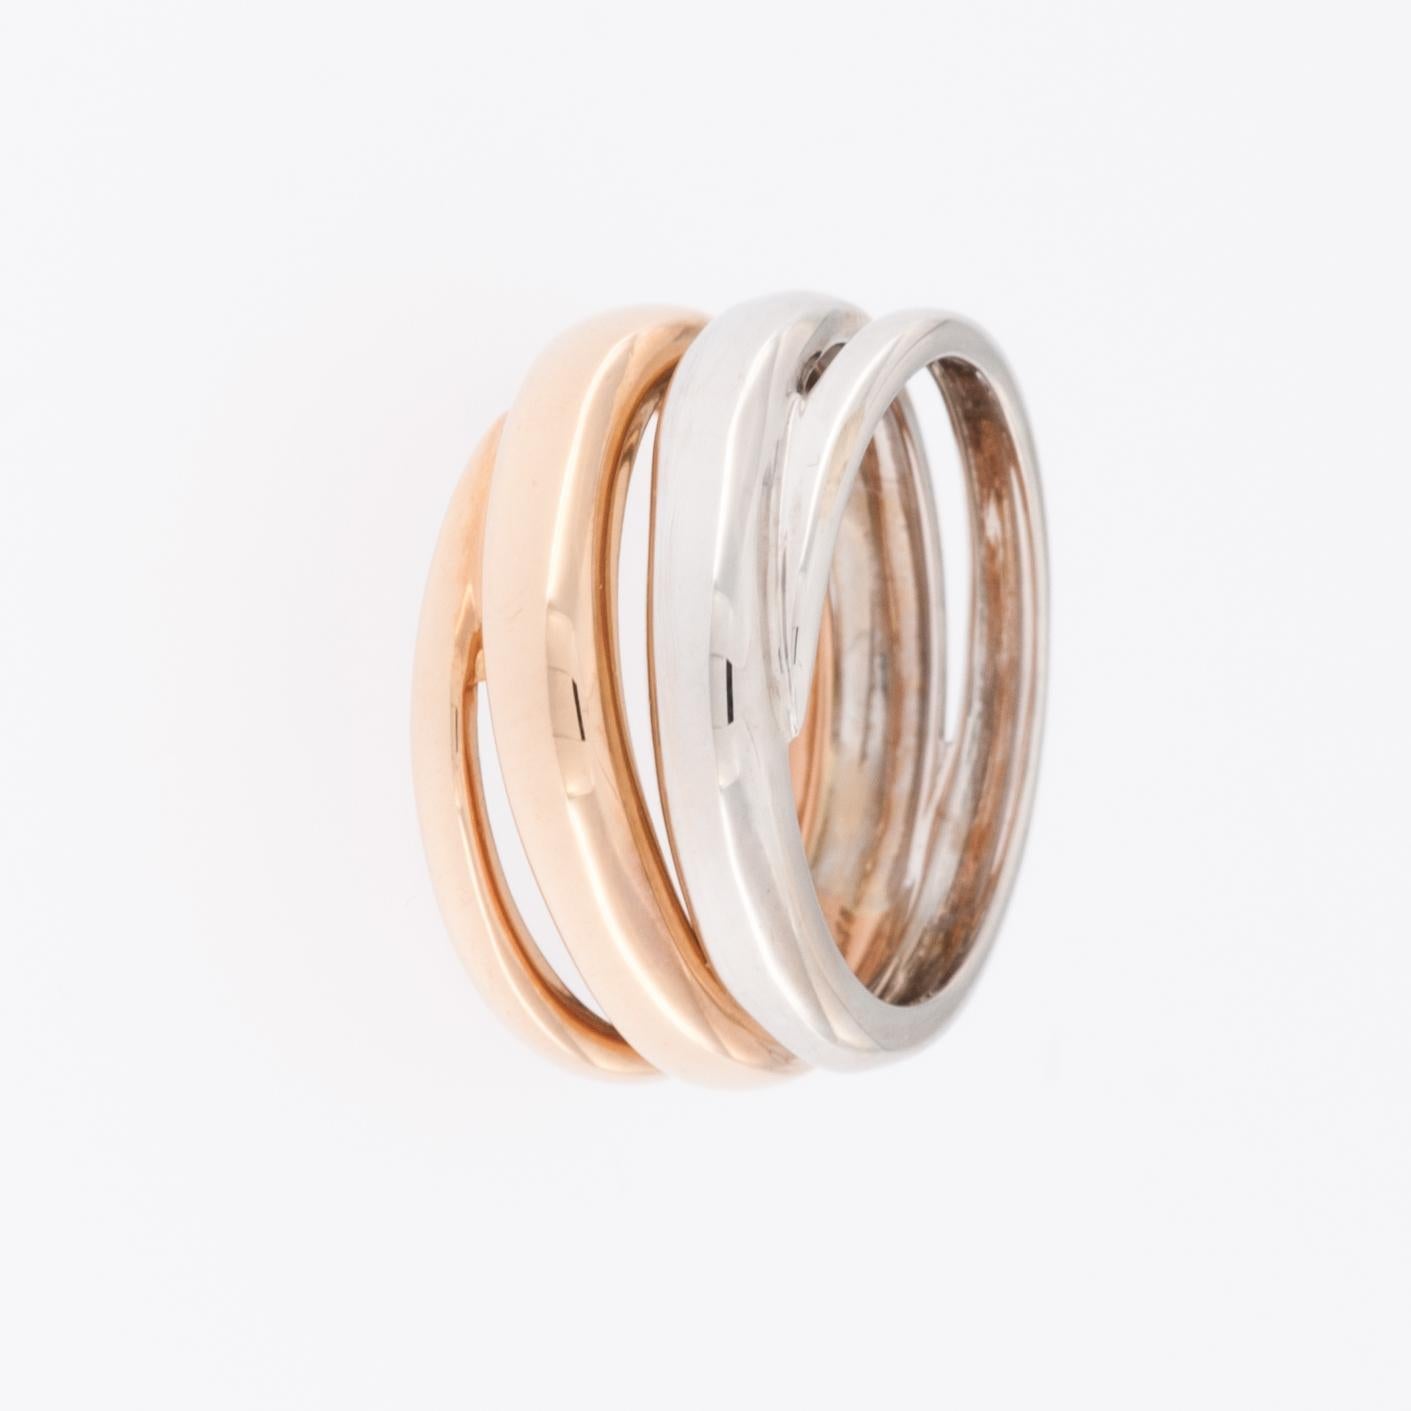 Contemporary Spiral Design 18 karat White and Rose Gold Ring For Sale